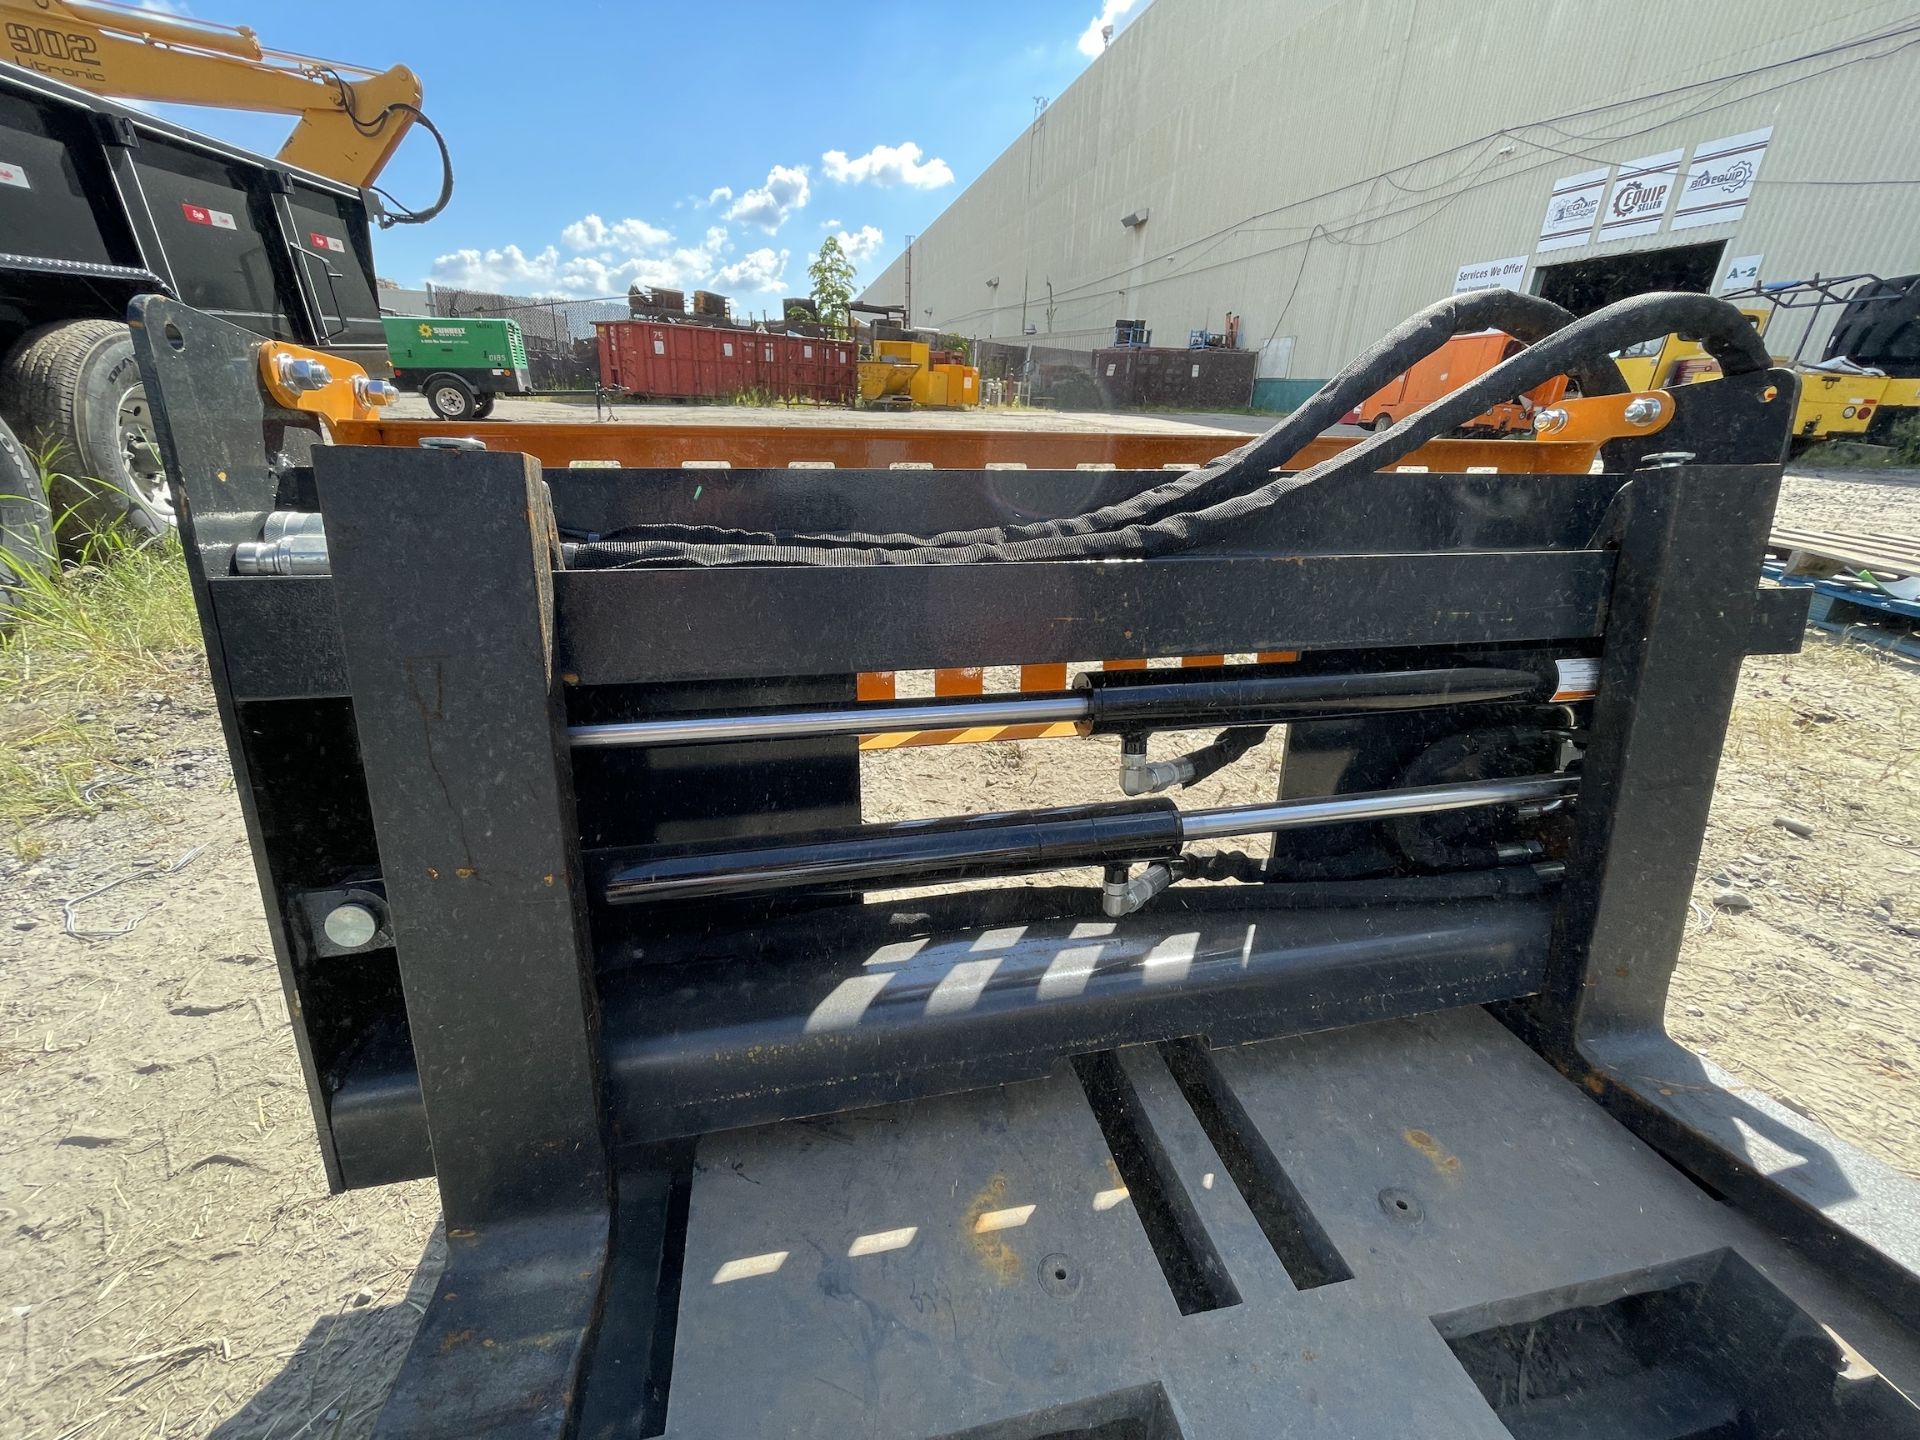 New Wolverine Skid Steer Fork Attachments (C202) - Image 6 of 7